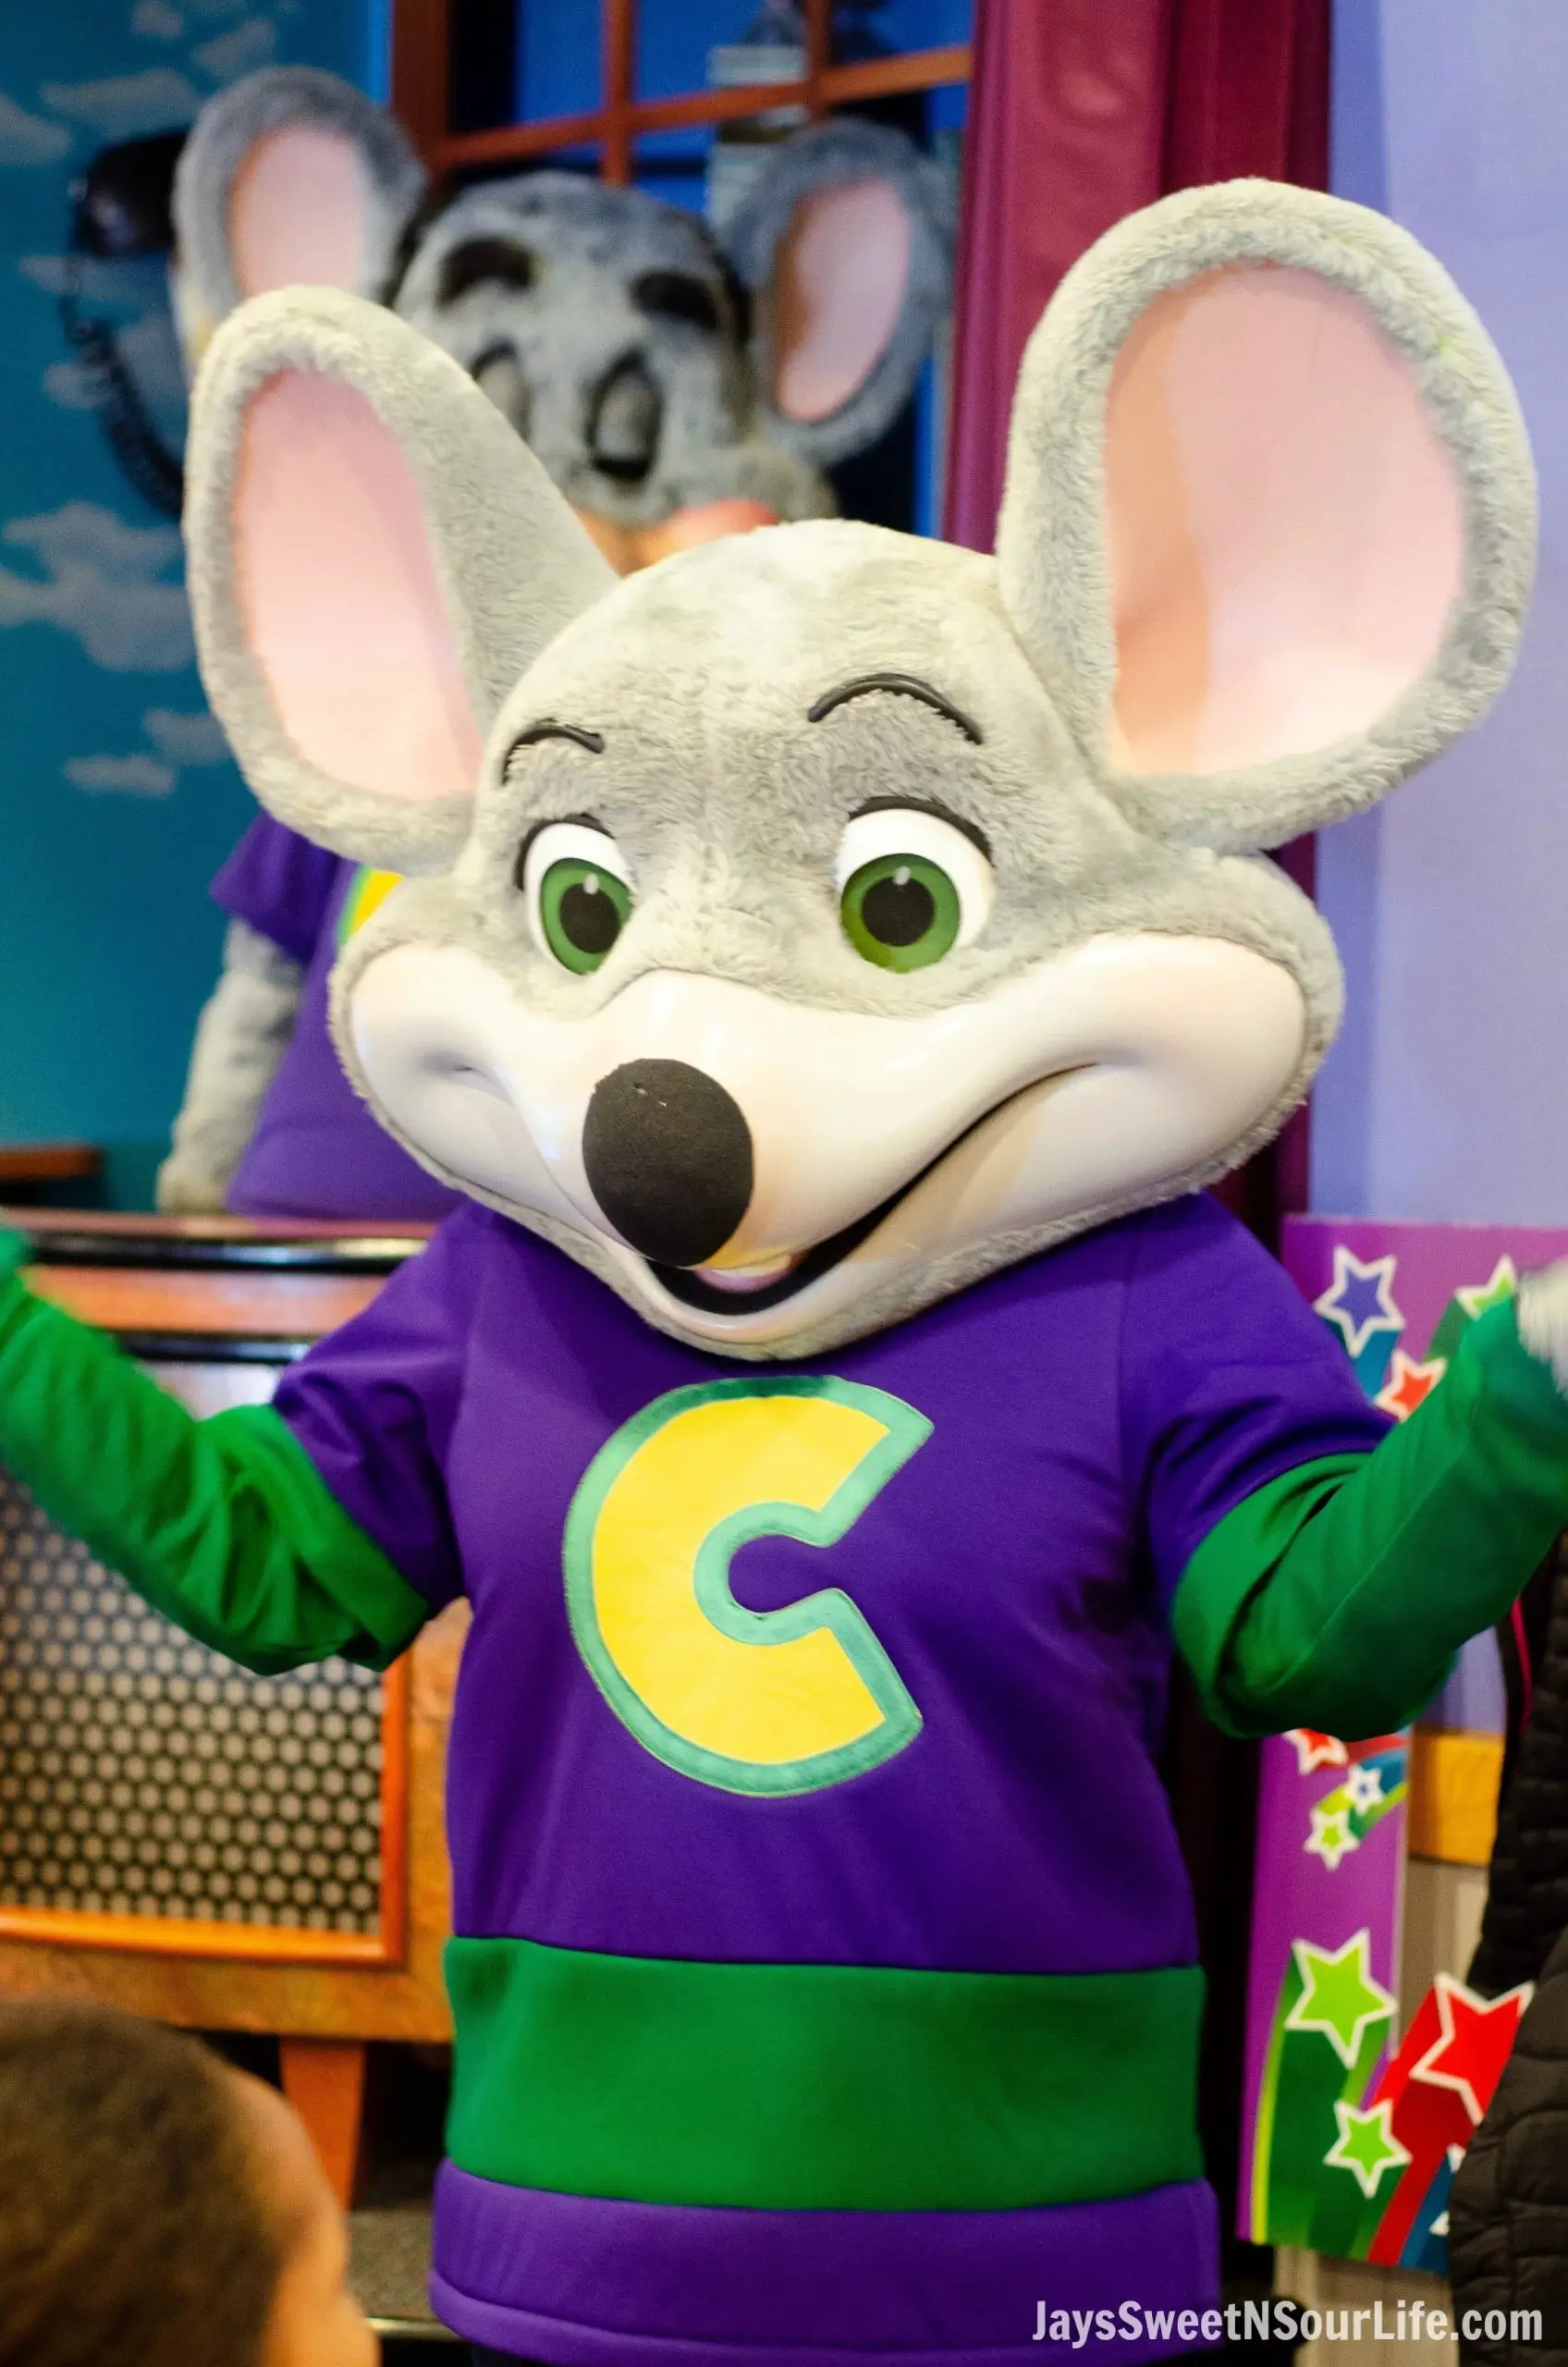 The Ultimate Chuck E. Cheeses VIP Birthday Party Guide